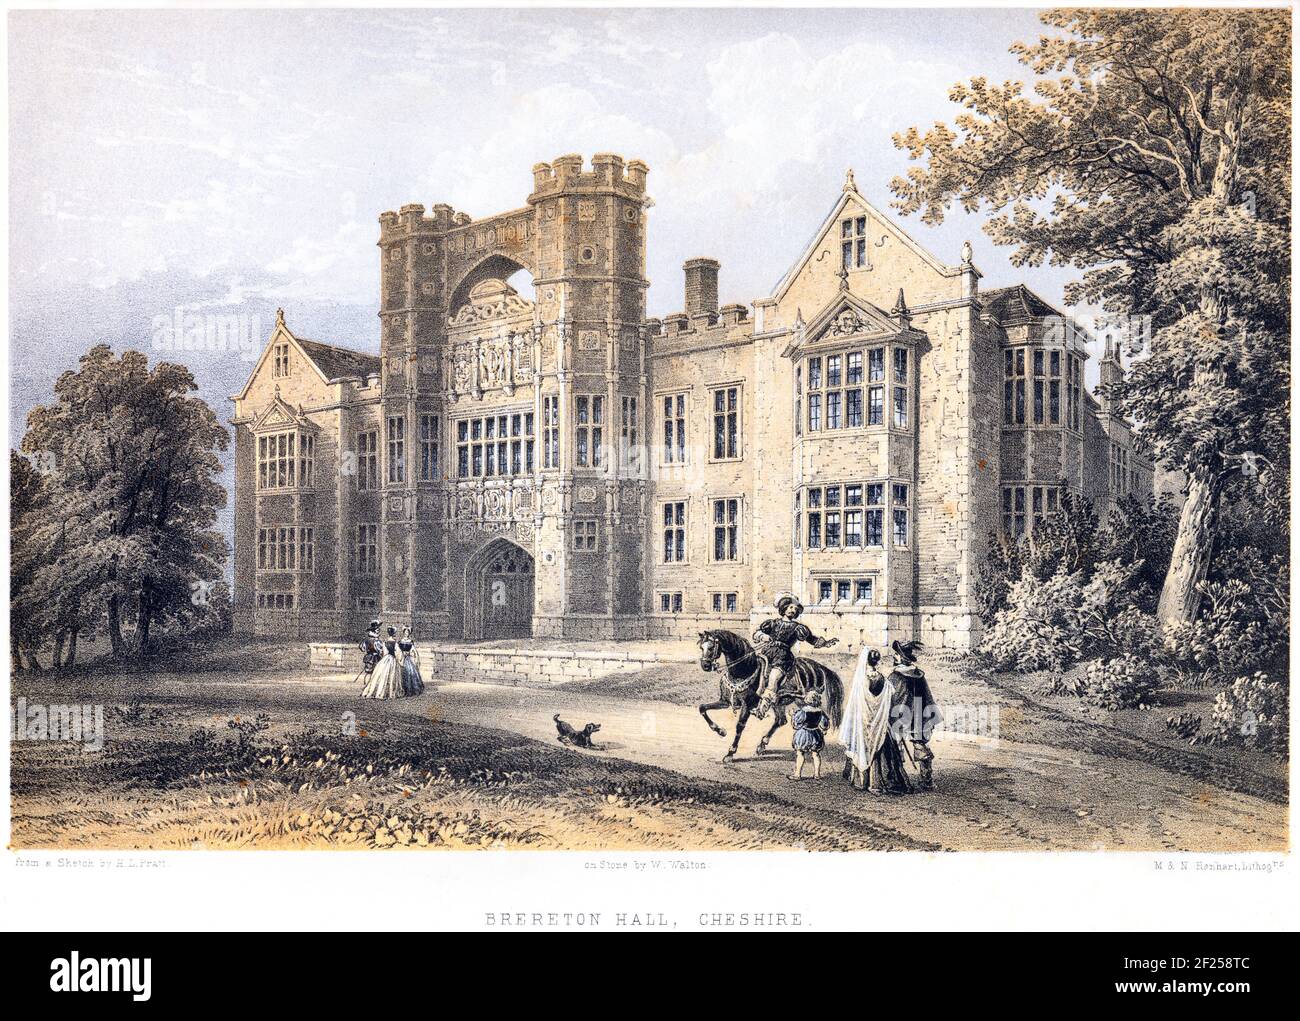 A lithotint of Brereton Hall, Cheshire scanned at high resolution from a book printed in 1858. This image is believed to be free of all historic copyr Stock Photo